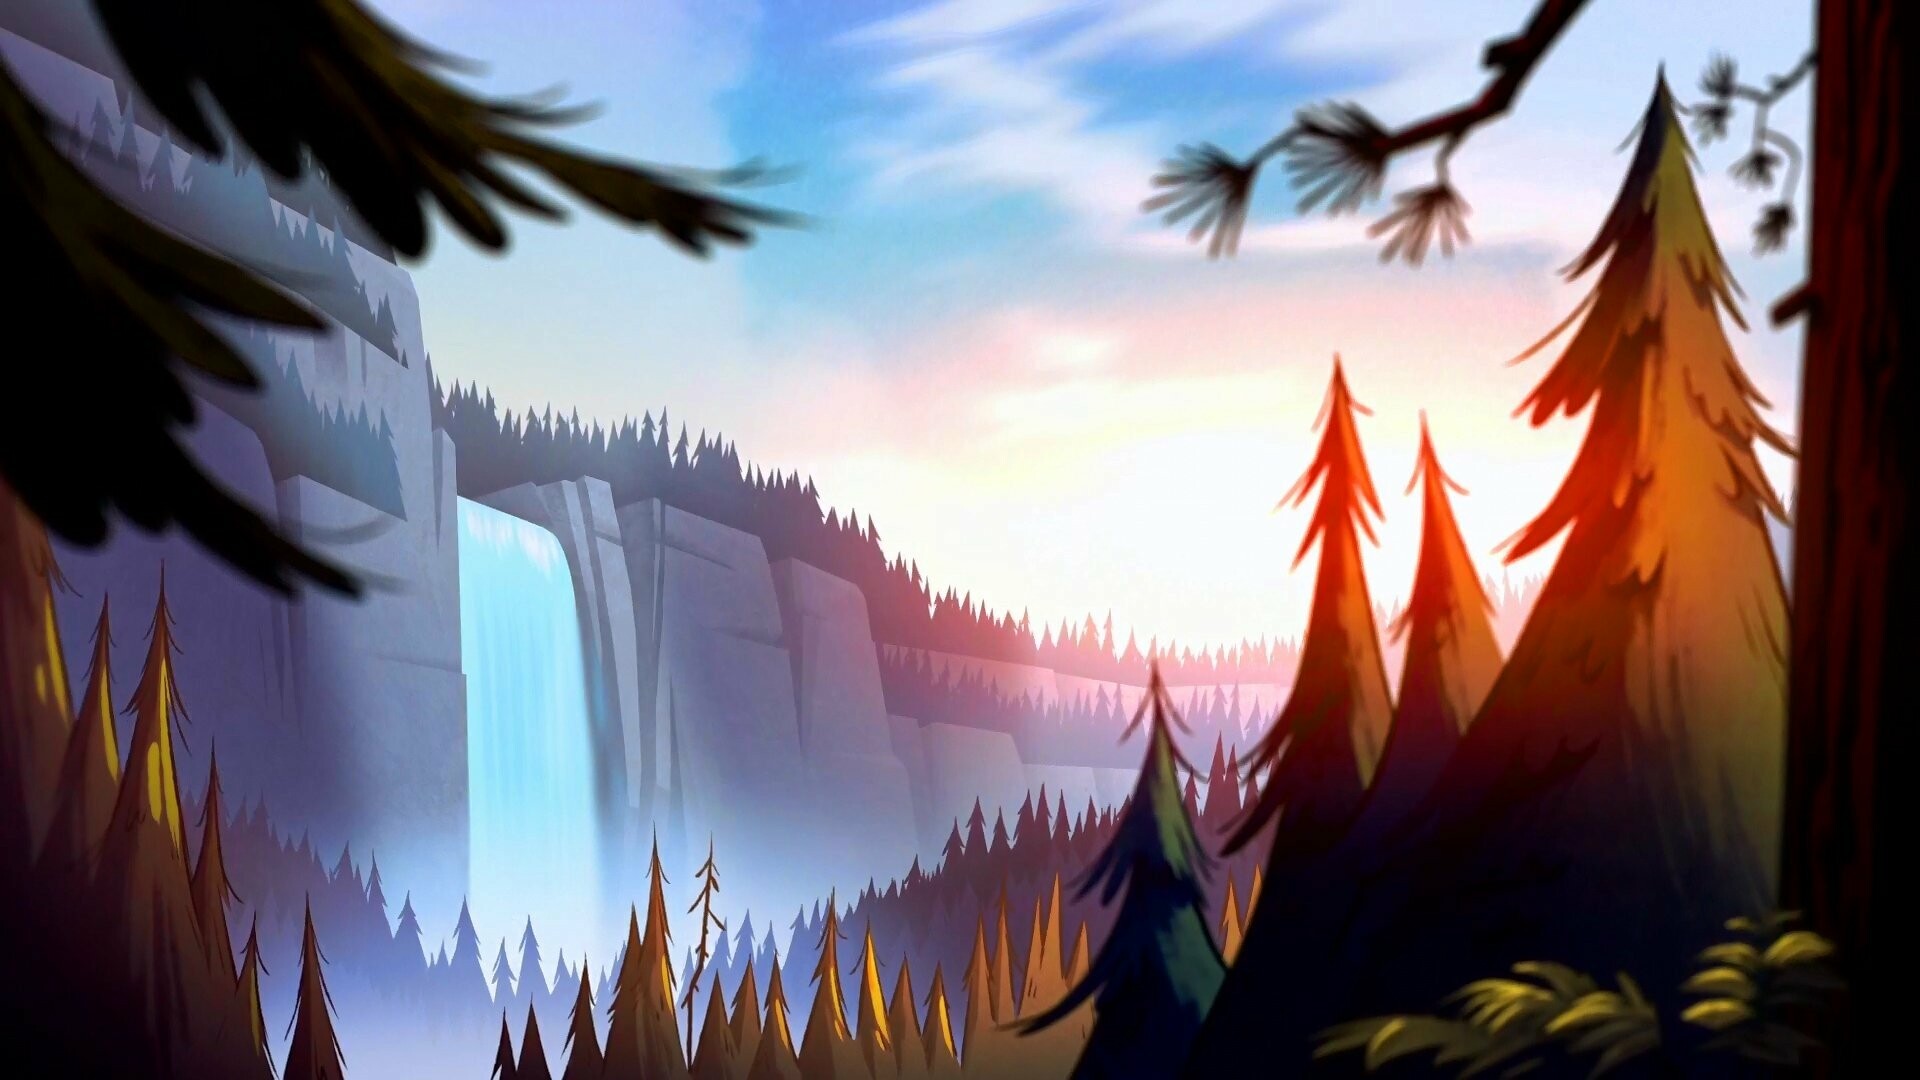 Gravity Falls: The series finale "Weirdmageddon 3: Take Back The Falls" became Disney XD's most-watched telecast ever. 1920x1080 Full HD Background.